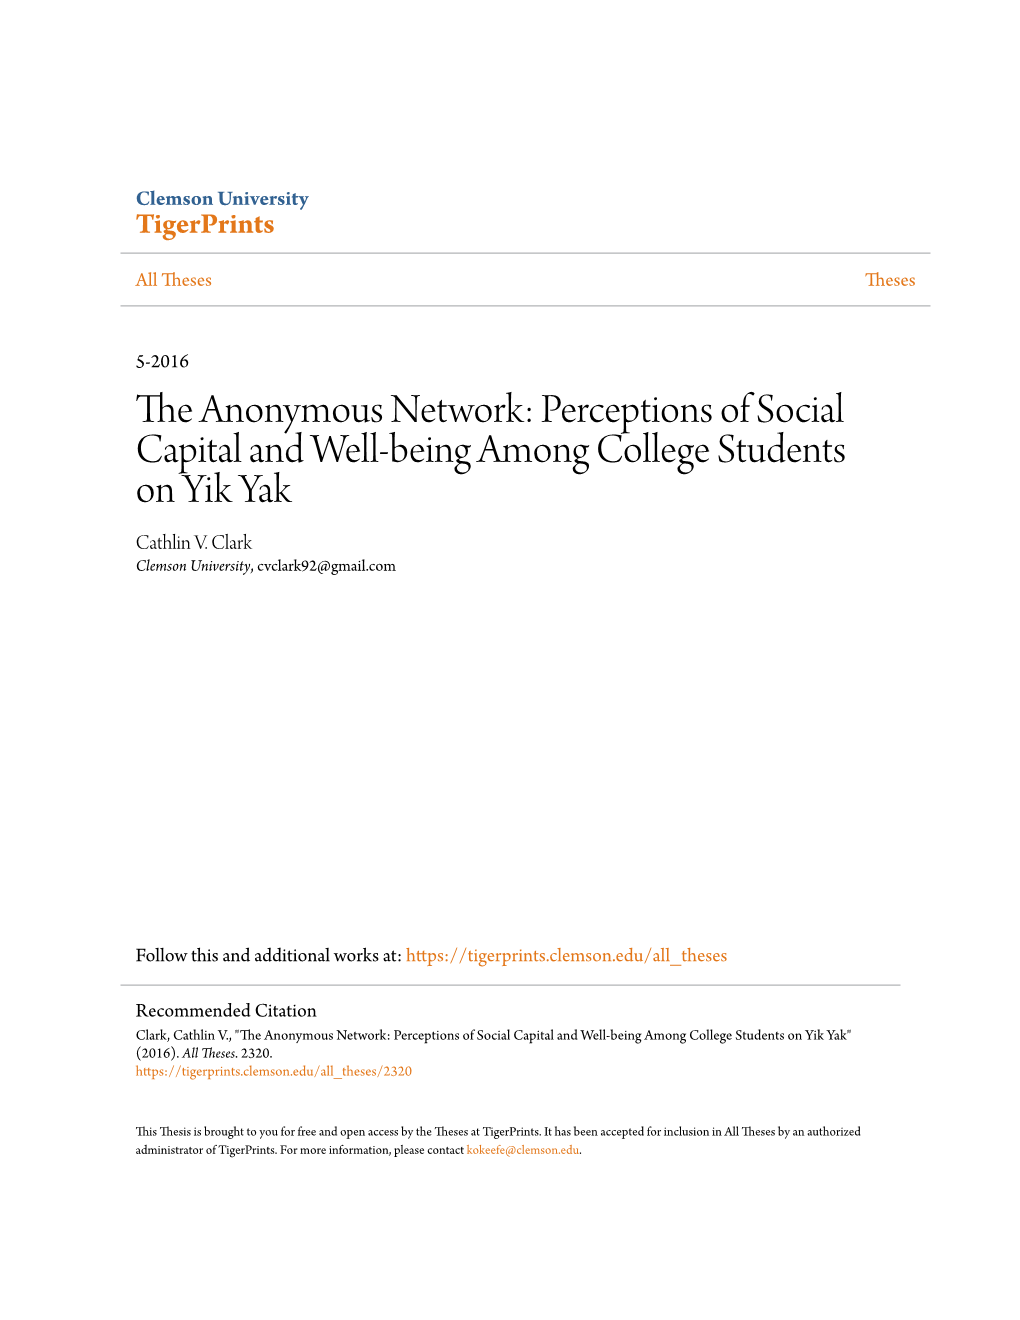 The Anonymous Network: Perceptions of Social Capital and Well-Being Among College Students on Yik Yak Cathlin V